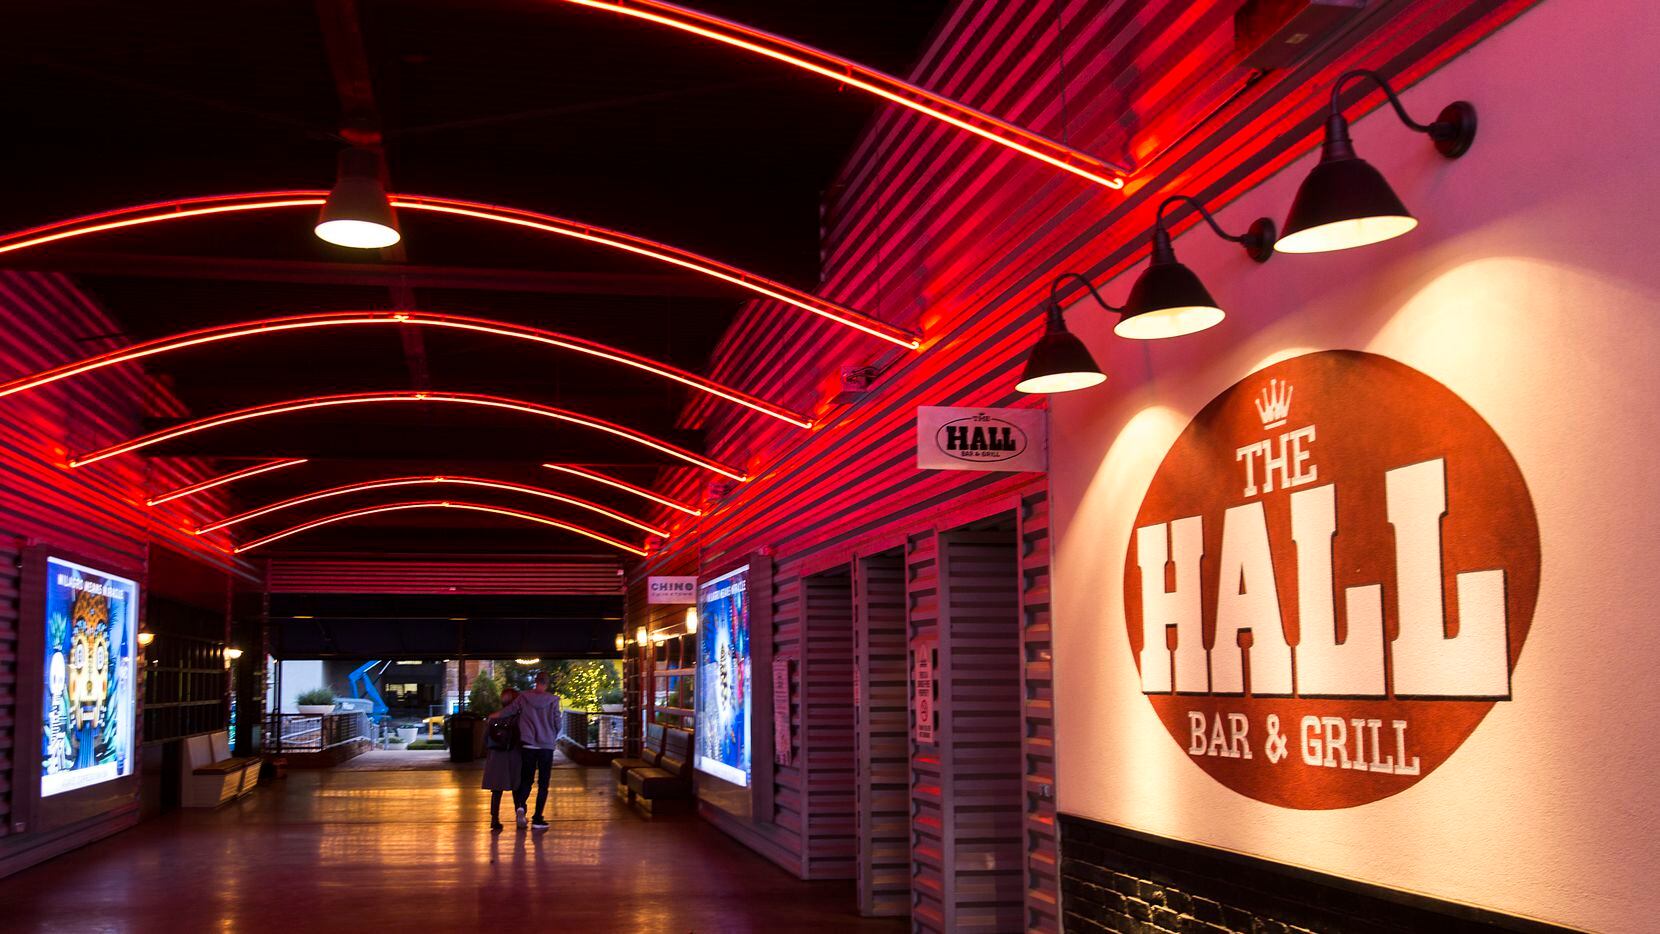 The Hall Bar & Grill closed July 31, 2020 after four years in business in Trinity Groves.